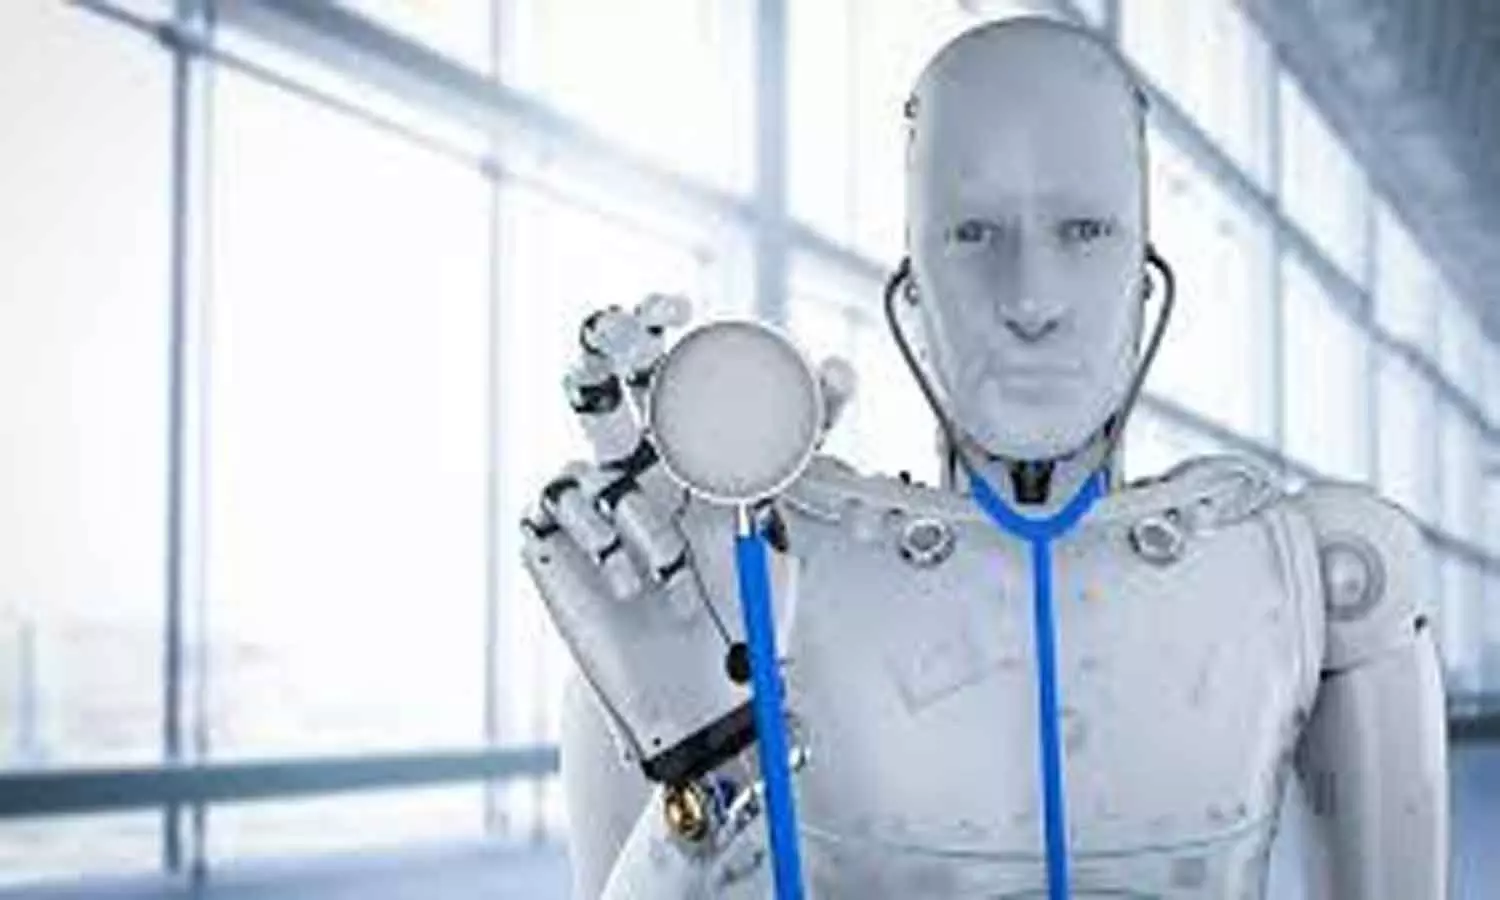 Could robots take care of COVID-19 patients- a wake-up call for robotics research